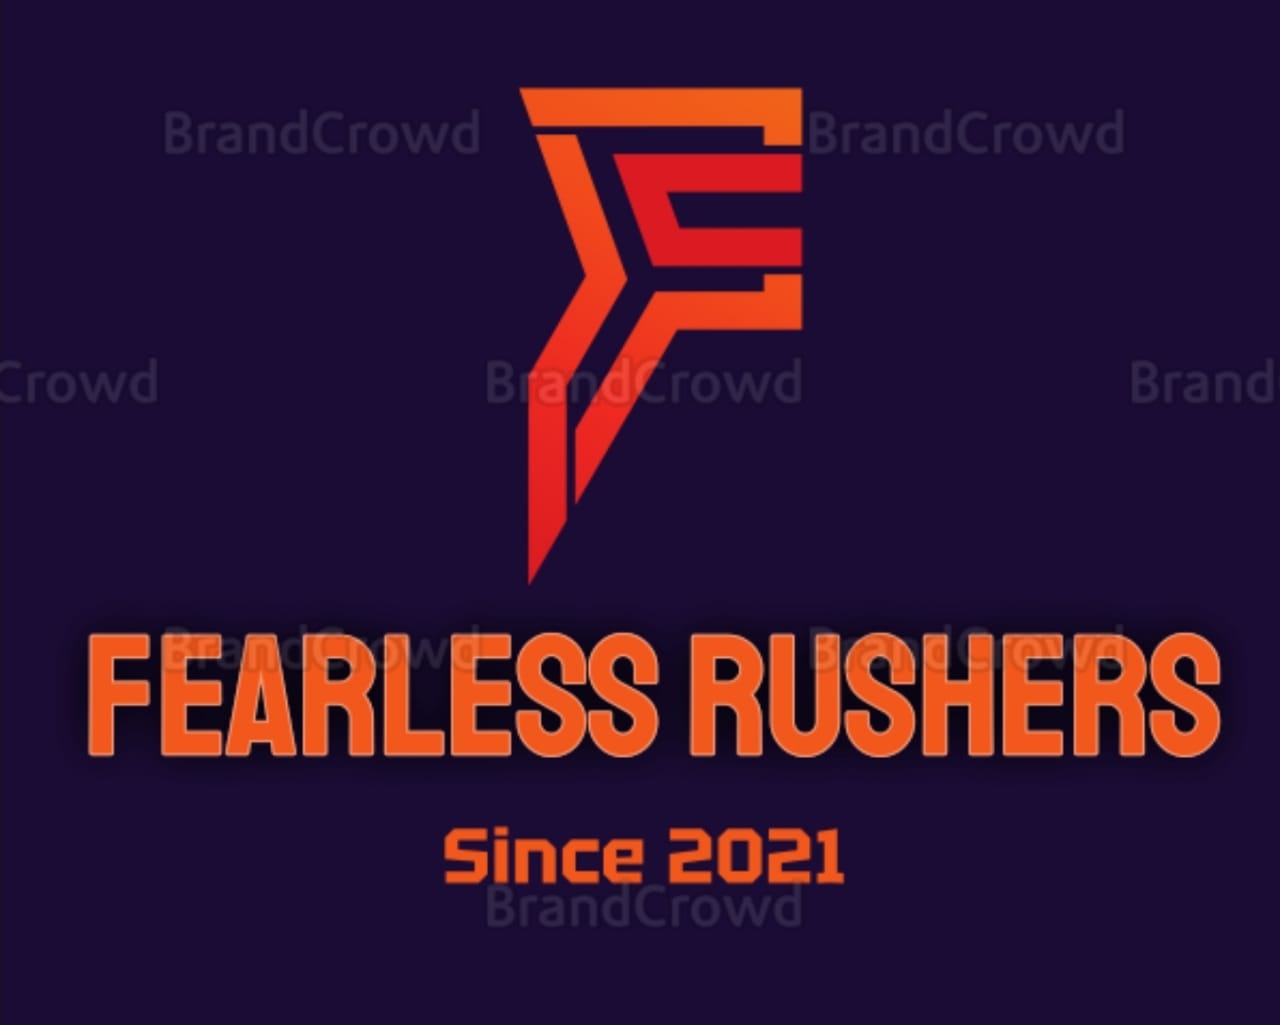 Fearless Rushers